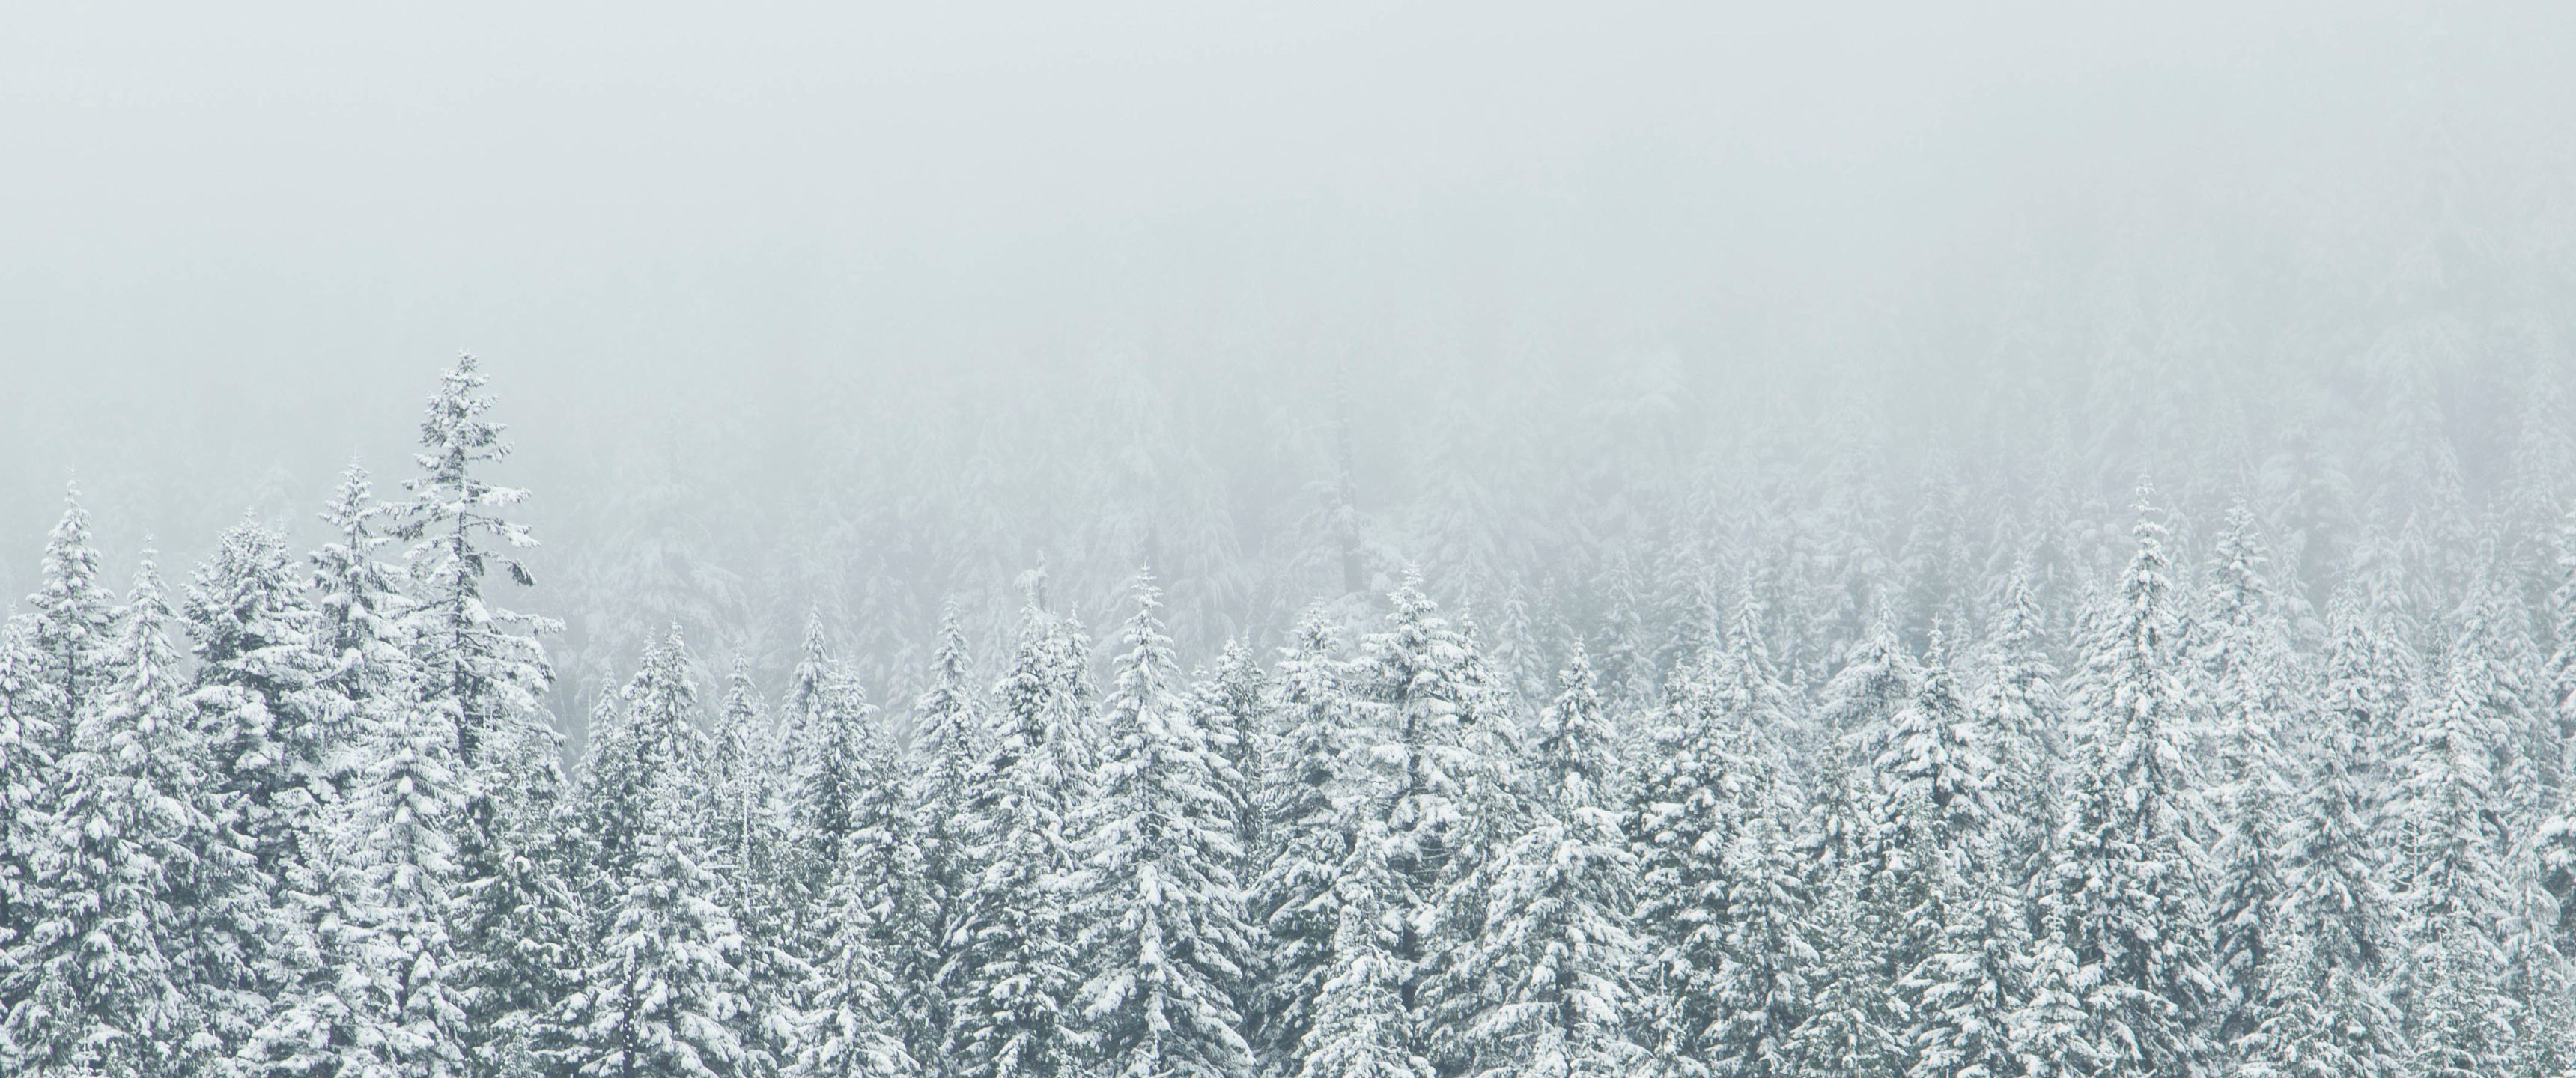 Free download Snow Covered Trees 219 Wallpaper Ultrawide Monitor 219 Wallpaper [3440x1440] for your Desktop, Mobile & Tablet. Explore Ultrawide Monitor Wallpaper. Ultra Wide Wallpaper 2560x1080 HD Wallpaper, 21 9 Wallpaper 3440x1440